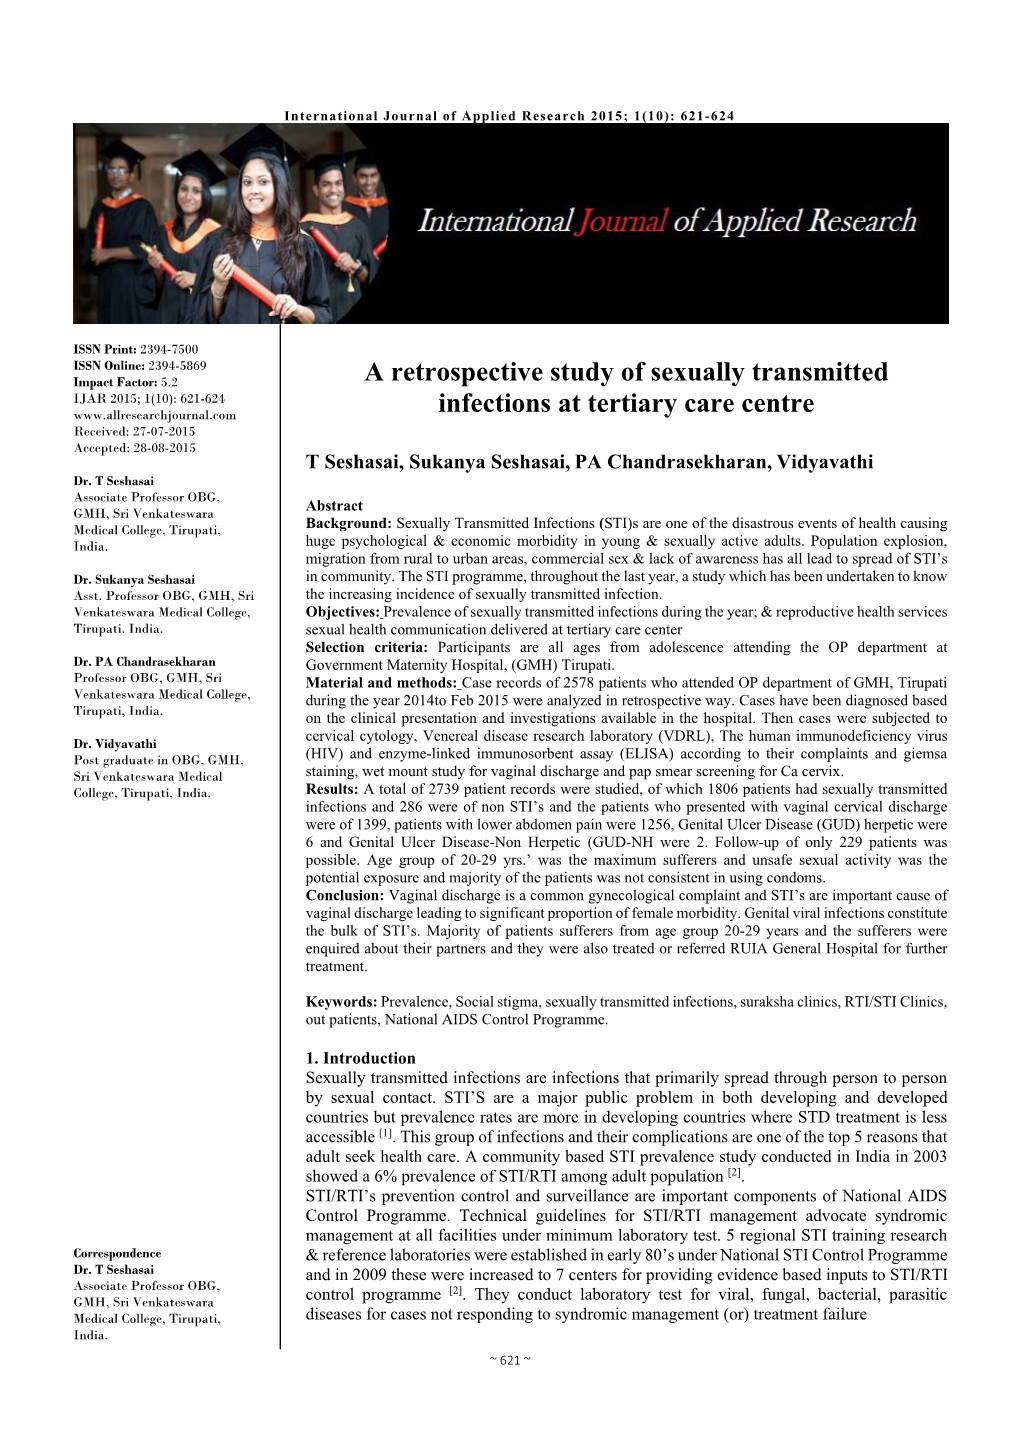 A Retrospective Study of Sexually Transmitted Infections at Tertiary Care